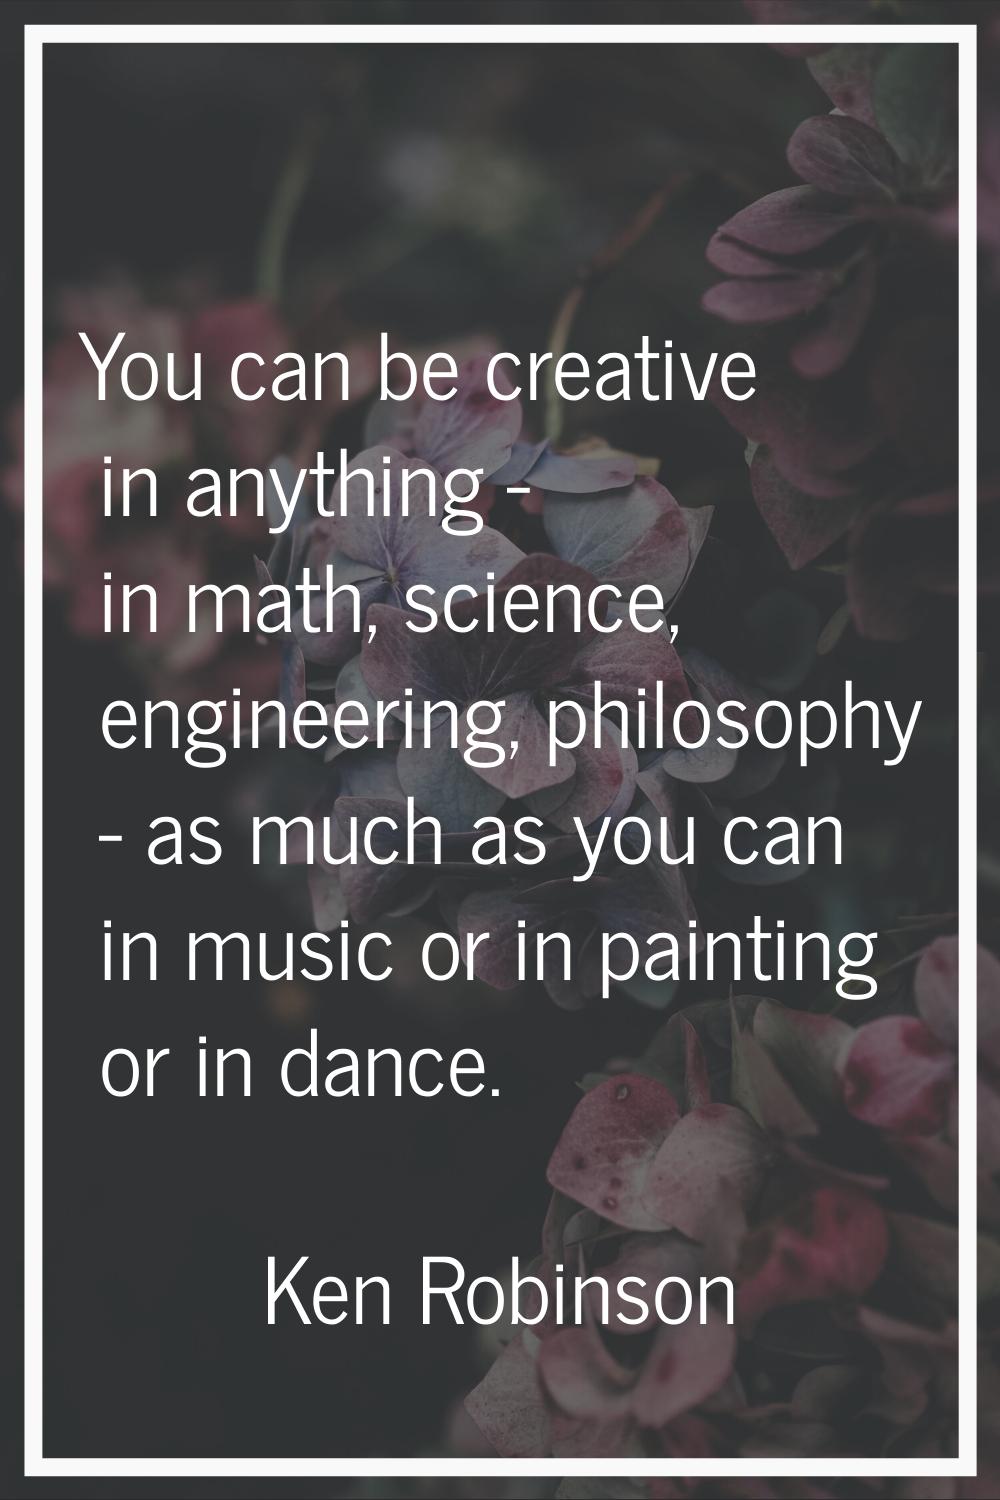 You can be creative in anything - in math, science, engineering, philosophy - as much as you can in